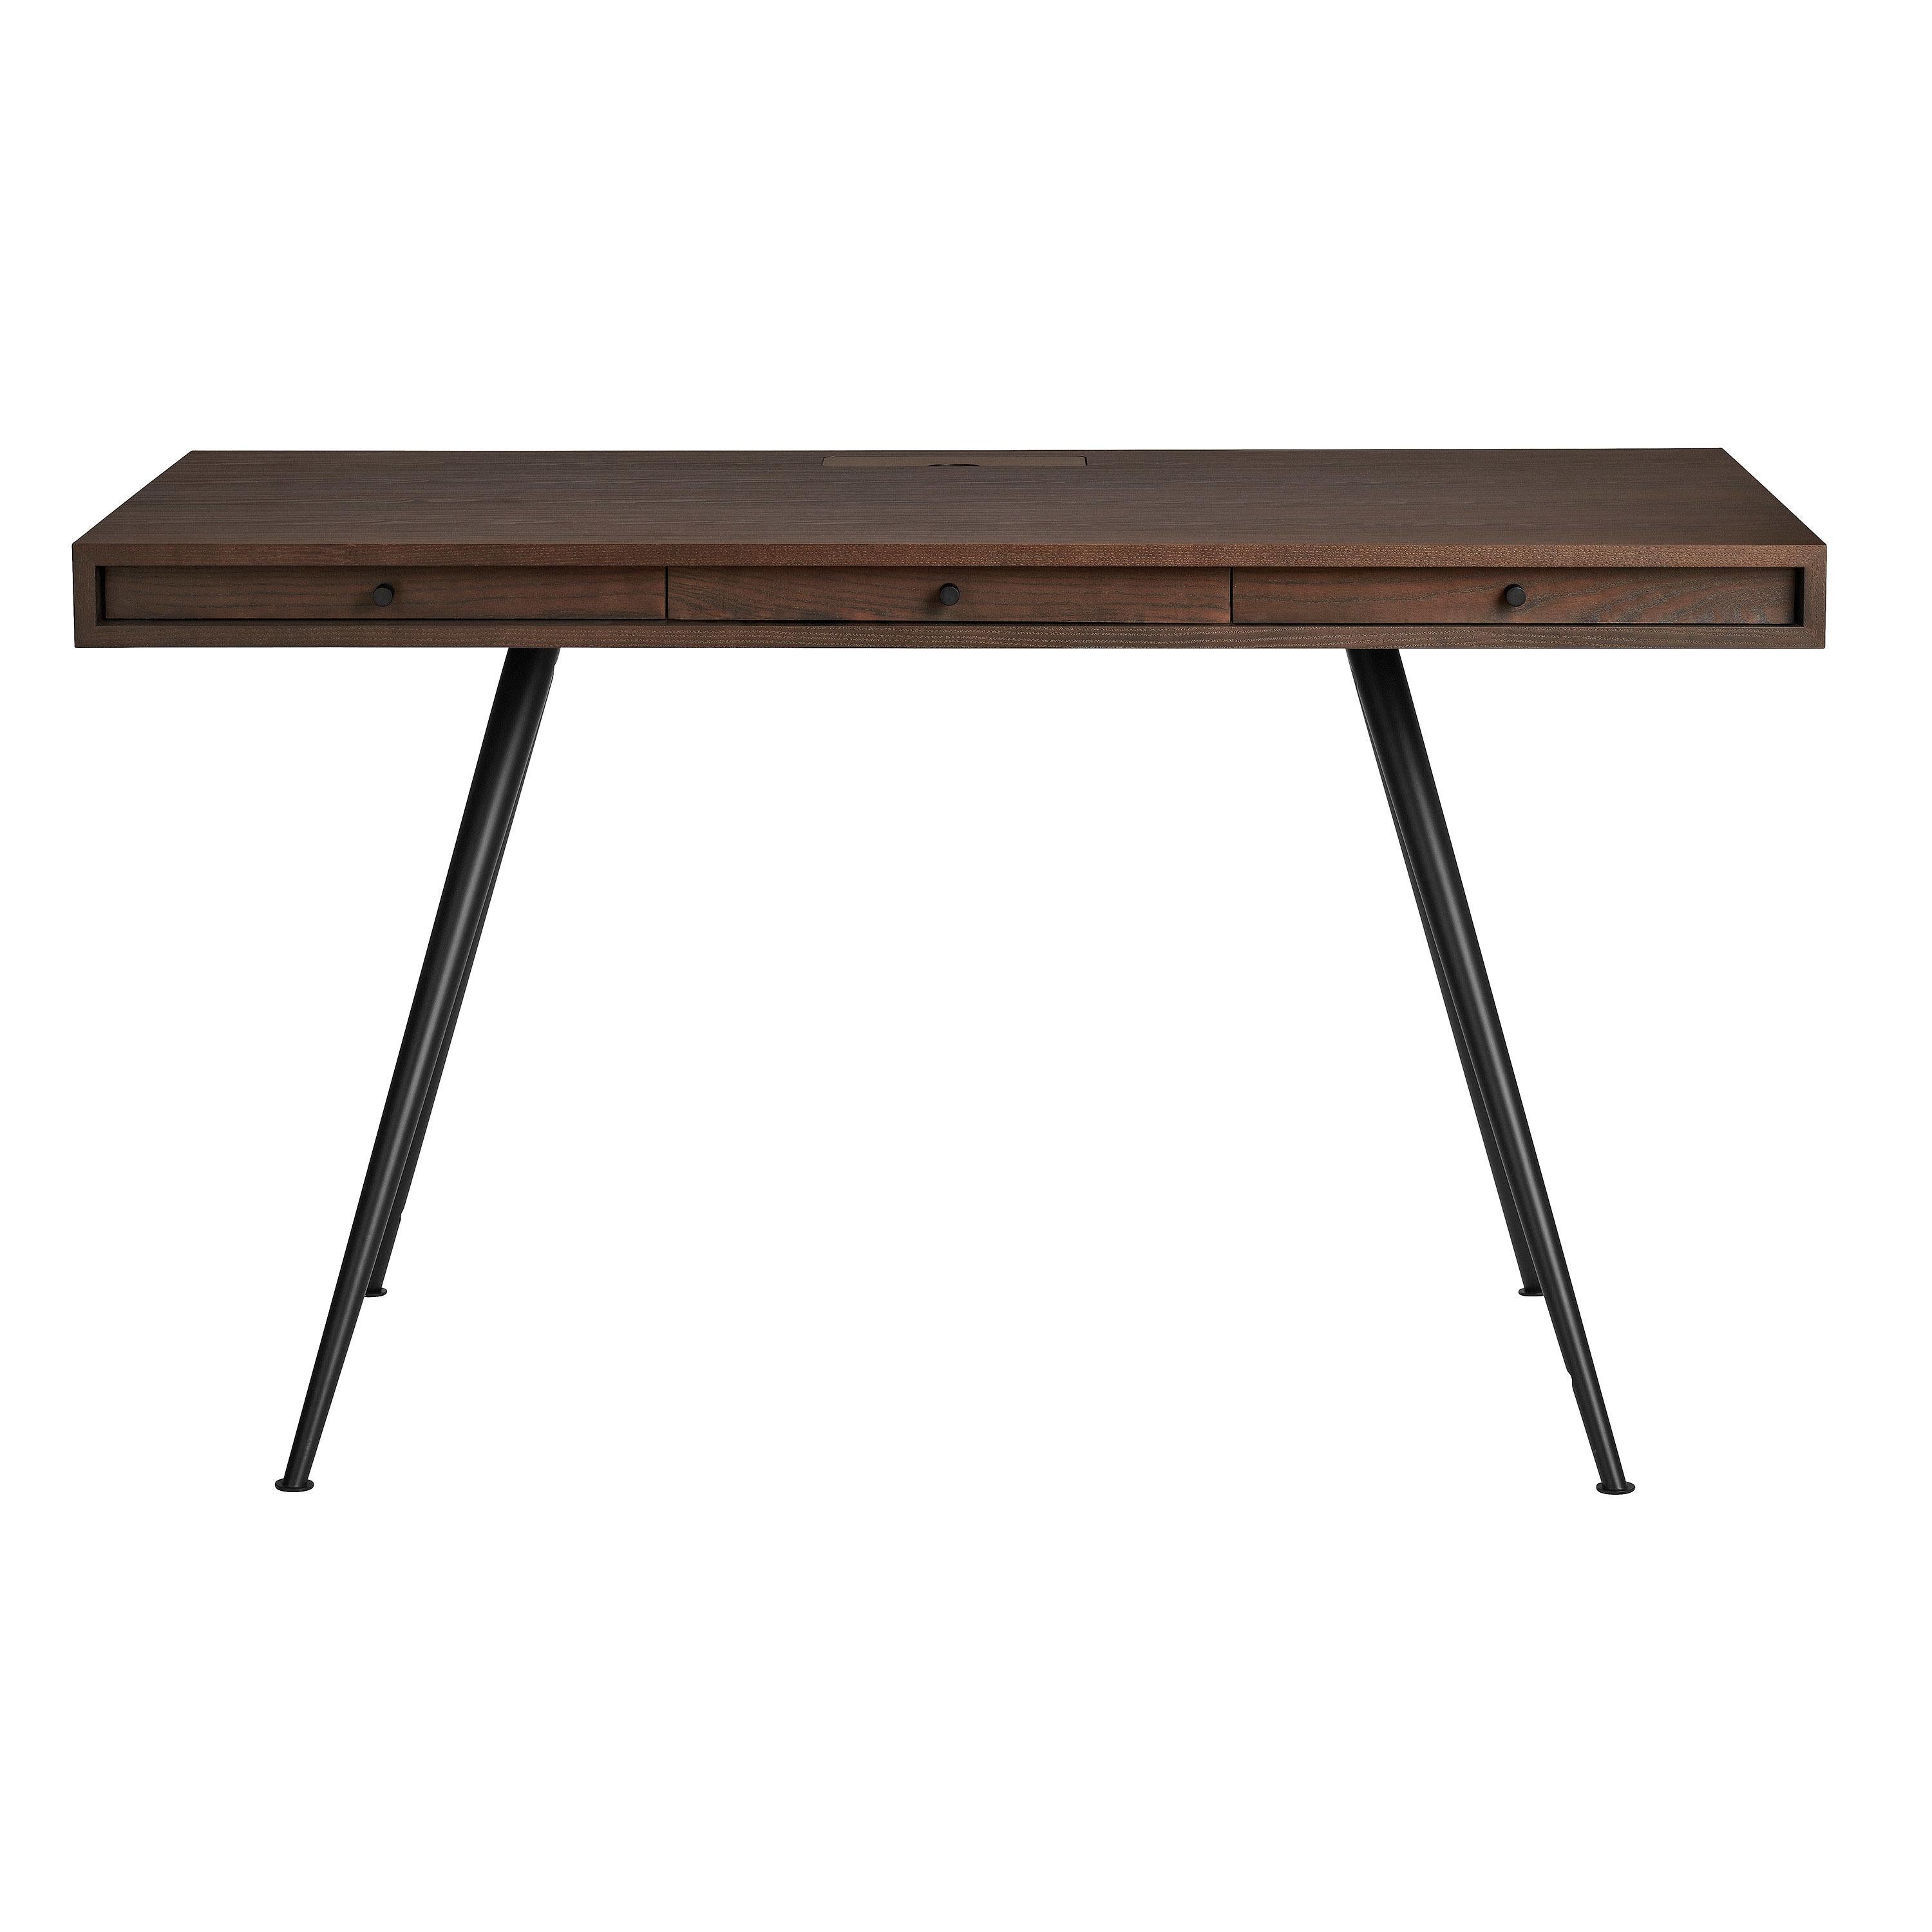 'JFK' Home Desk
Signed by Kristian Sofus Hansen & Tommy Hyldahl for NORR11

Dimensions: 
H. 76 cm x W. 130 cm x D. 65 cm 

Model shown: Dark Smoked Ash Wood 
Aluminium legs in matte black finish

_________________

With its pure and simplistic